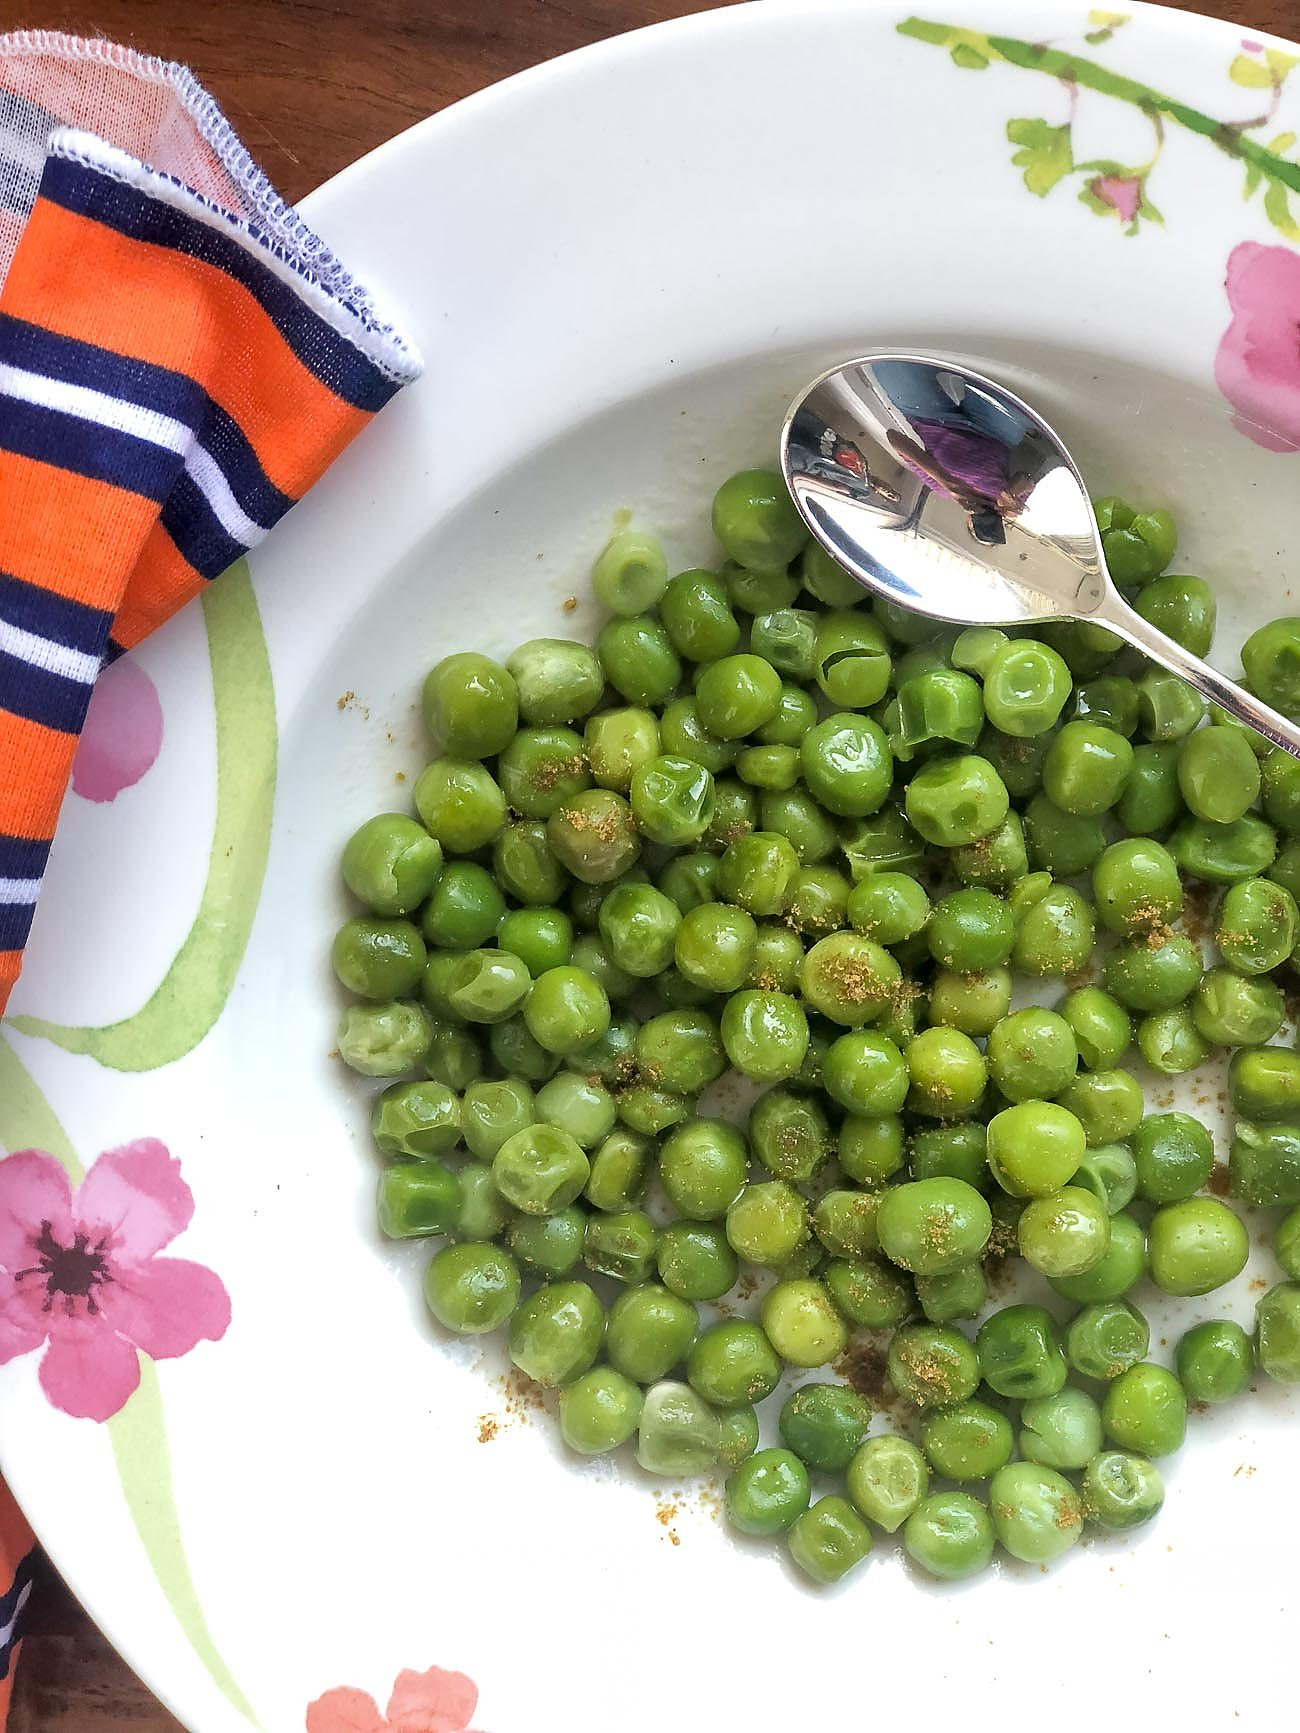 Buttered Green Peas with Cumin Powder - For Babies & Toddlers 10 Months and Above